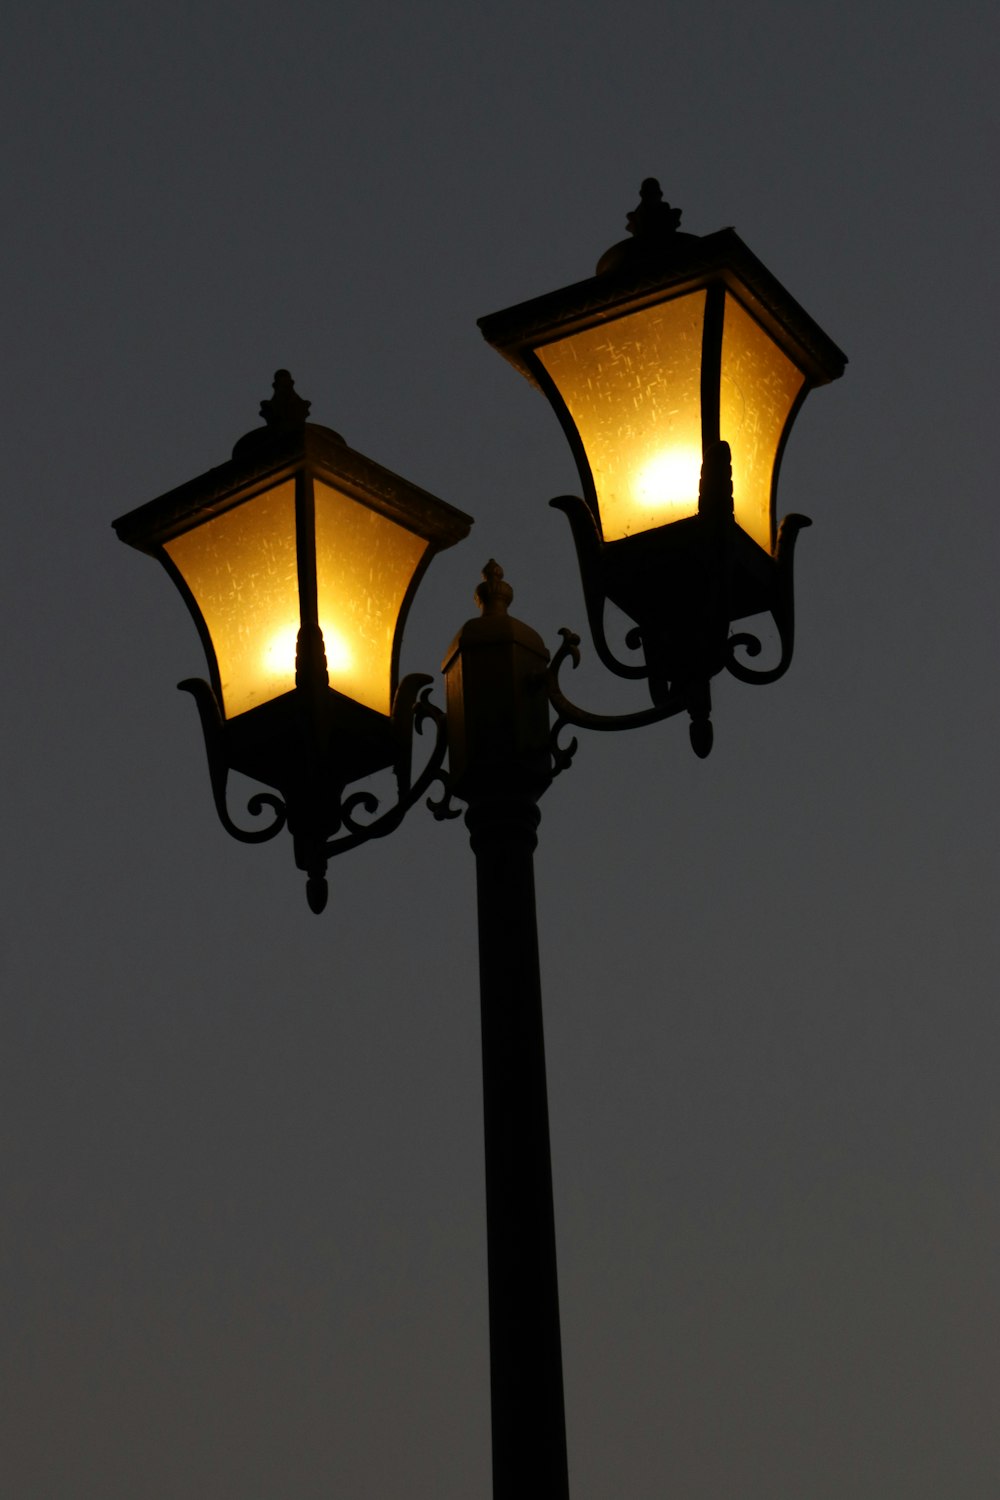 a couple of street lamps sitting next to each other